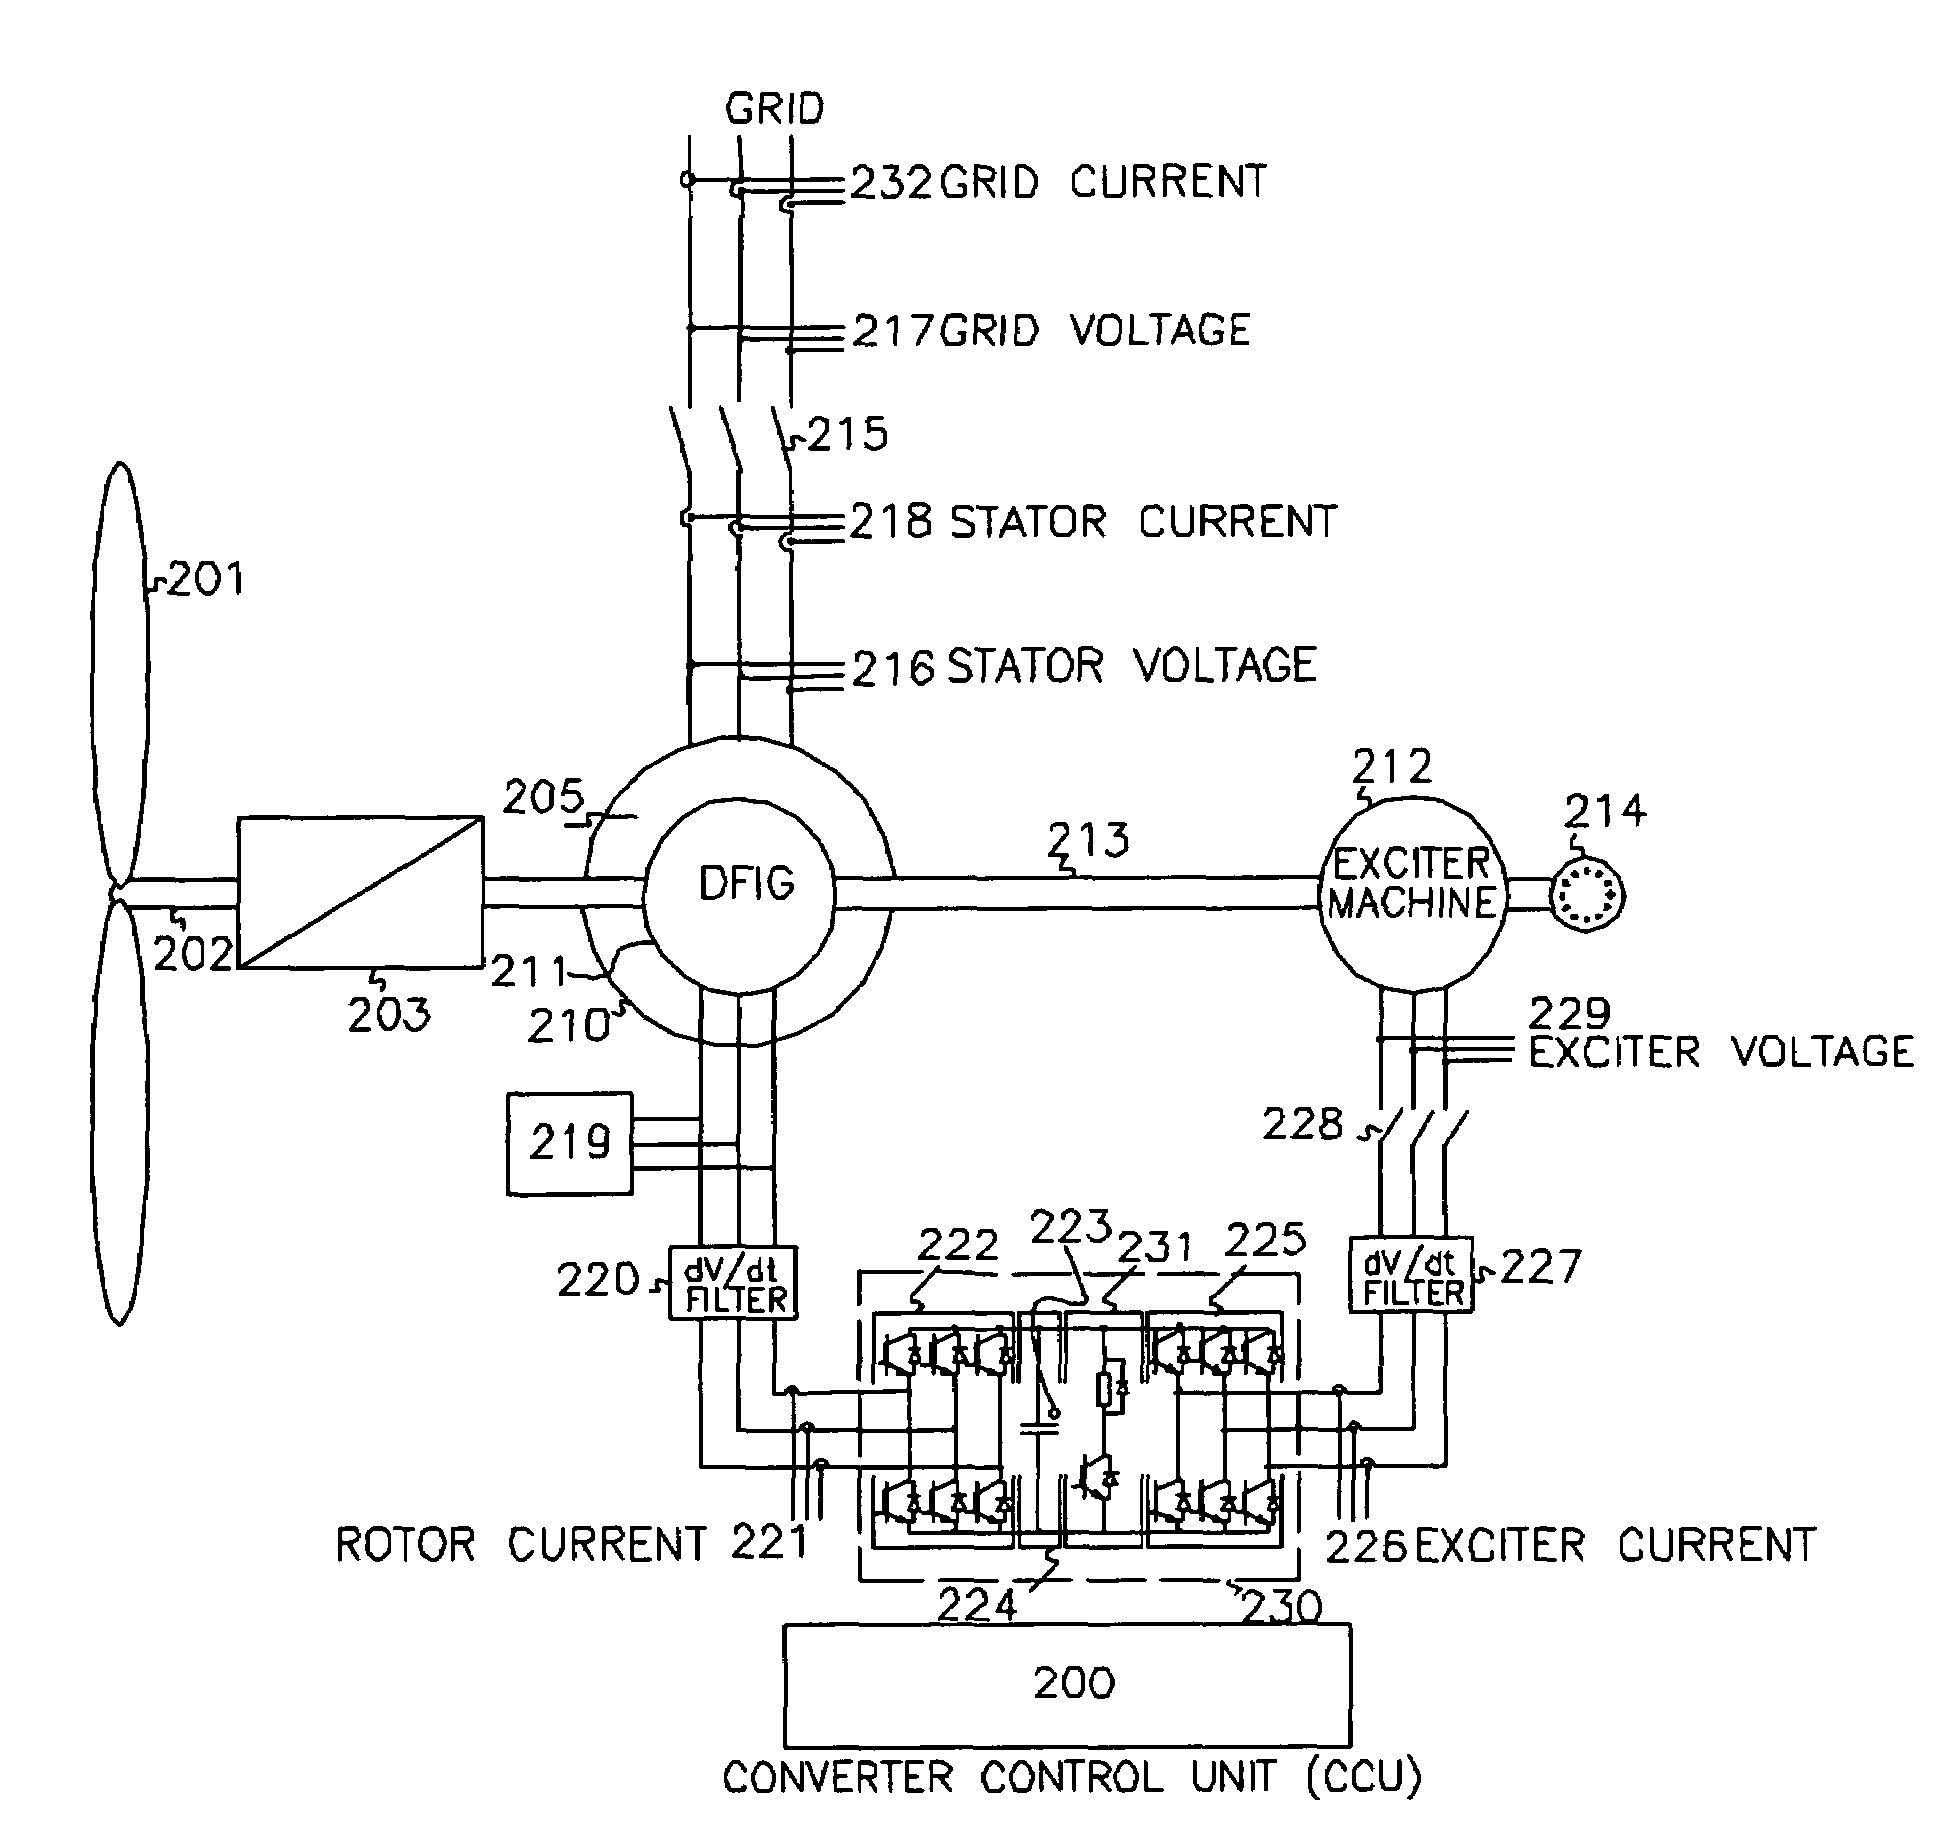 Variable speed wind turbine having an exciter machine and a power converter not connected to the grid